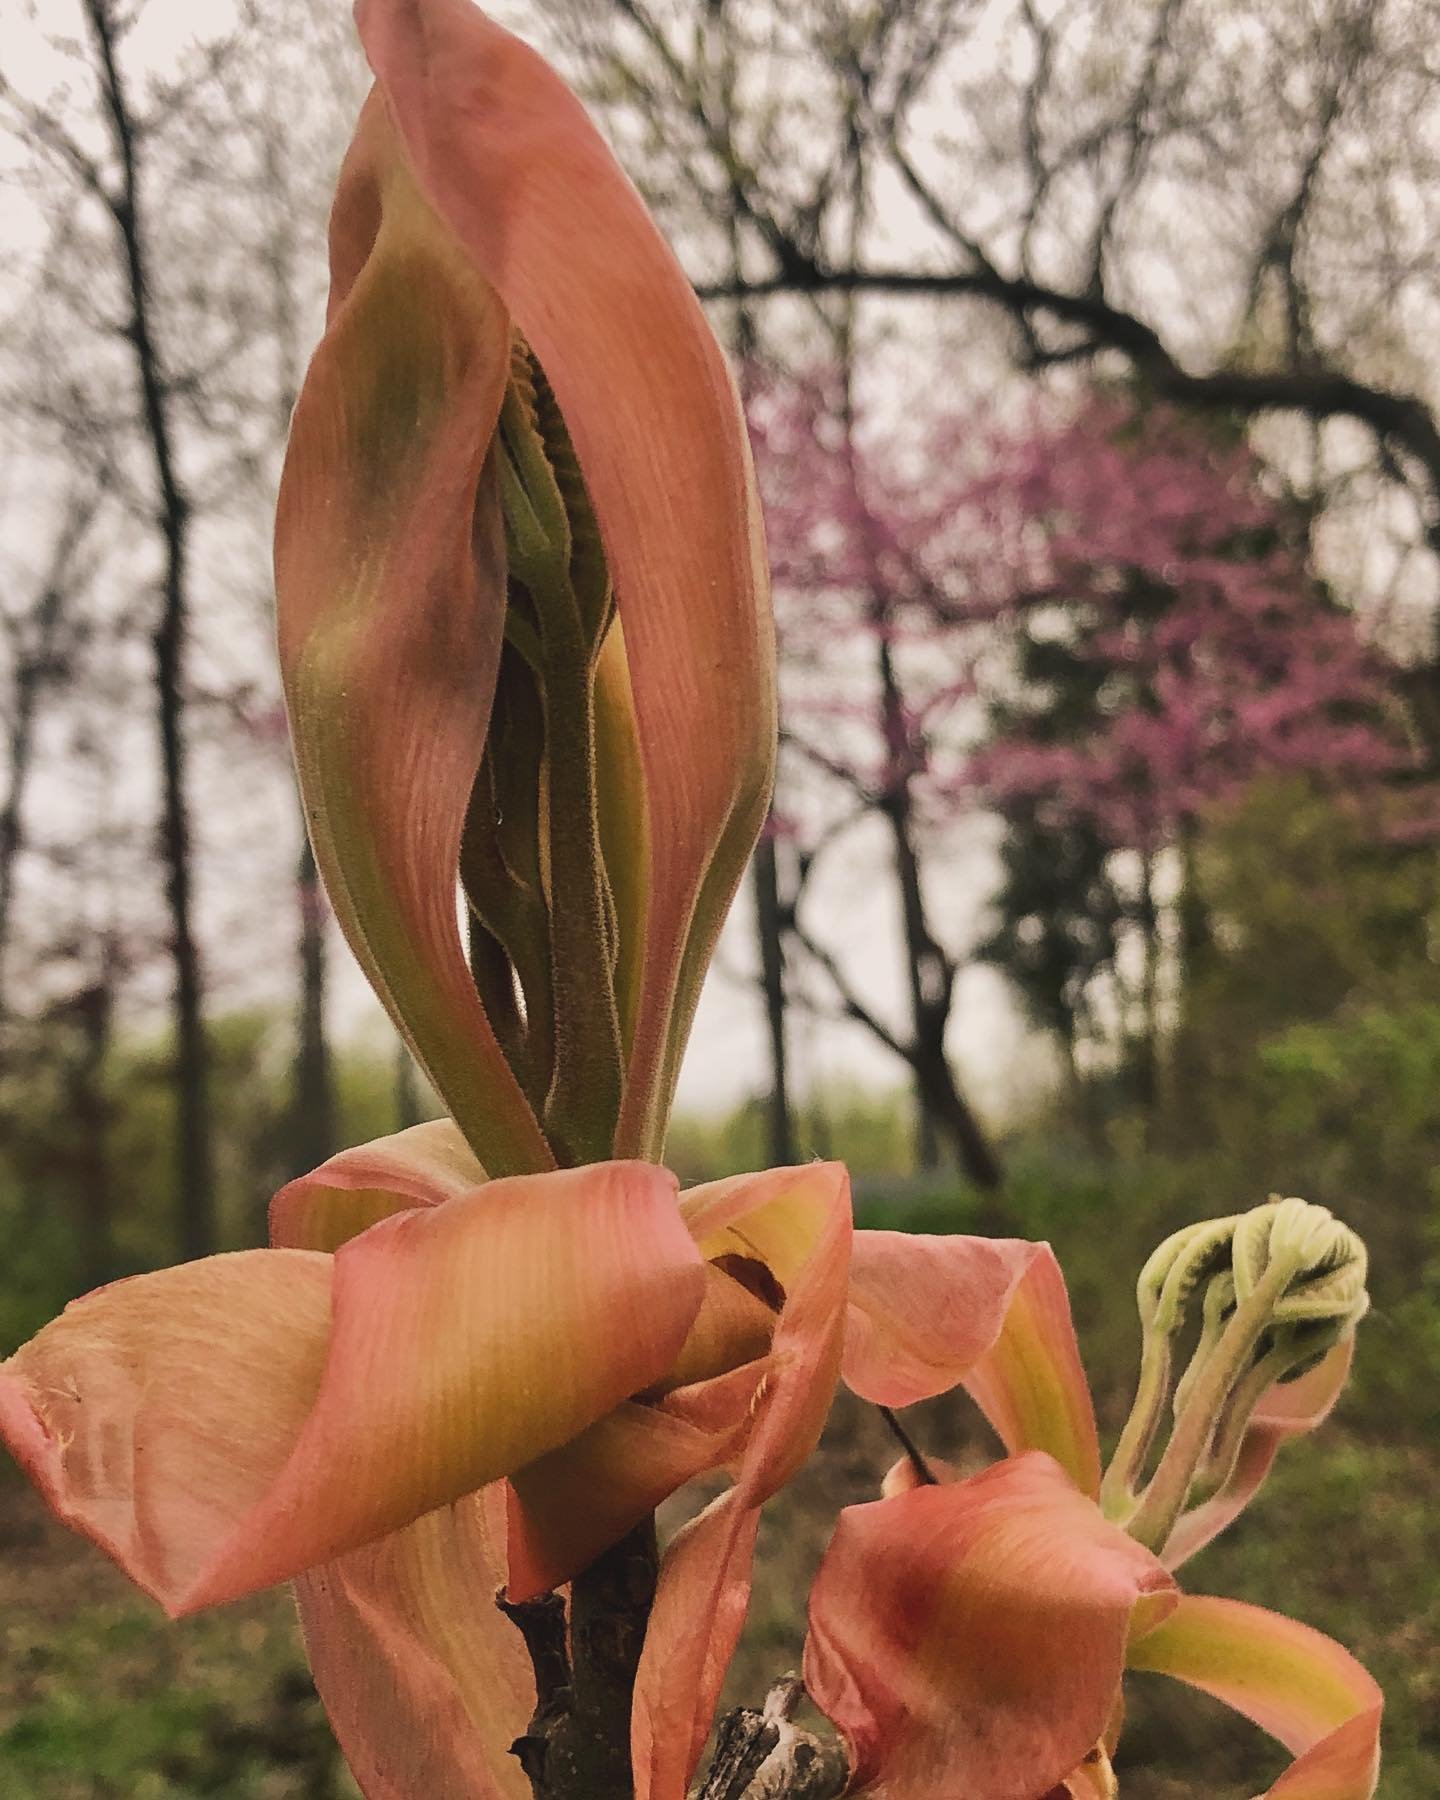 The Shagbark Hickory flower can be a beautiful reminder to allow ourselves to unfurl in all of our vulnerable, unique, soft, flowy, playful joyfulness&hellip;

And that when we do, we exude a truly marvelous, captivating, inspiring energy that feels 